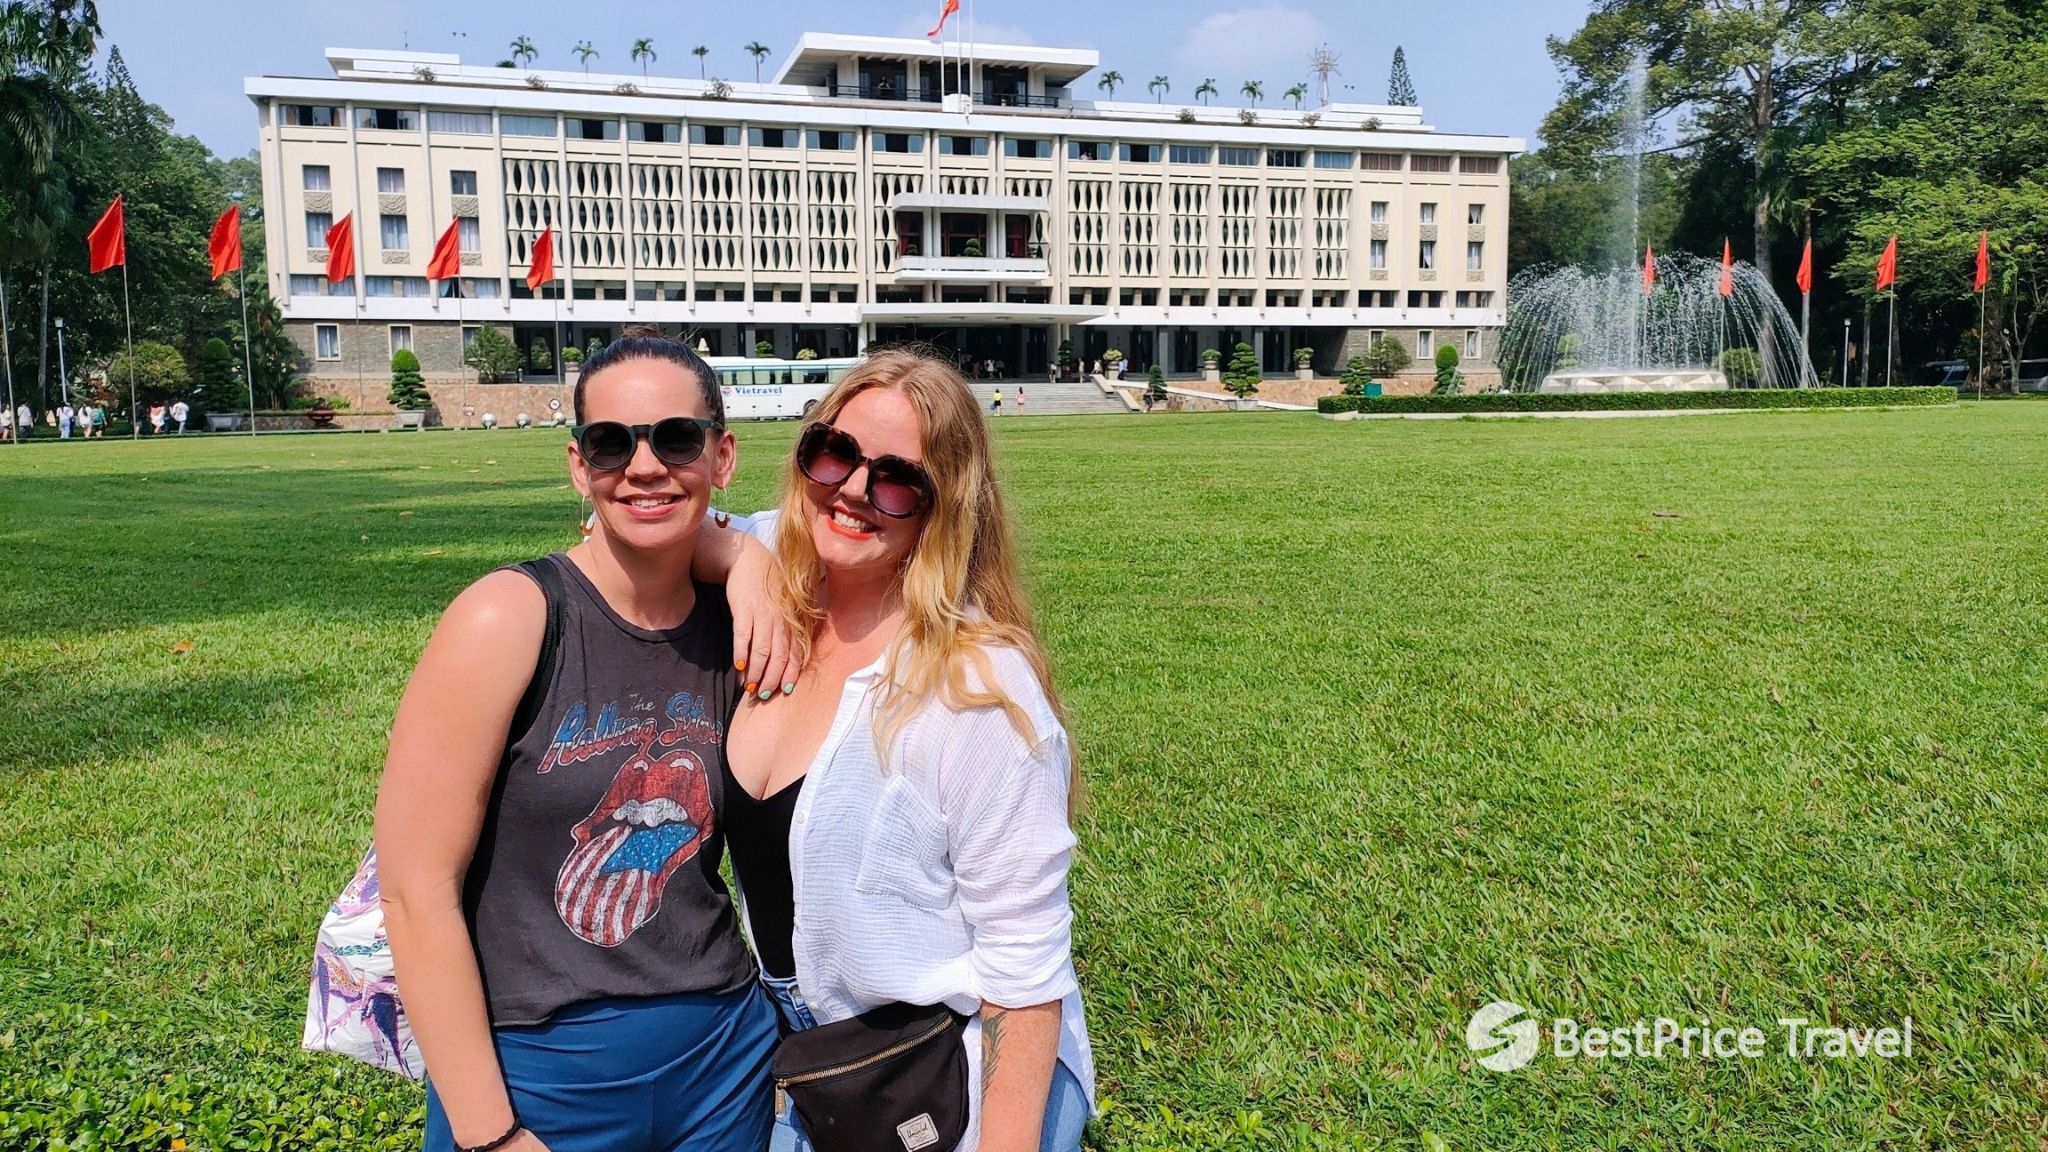 Day 3 Gain Knowledge About Vietnam History In Independence Palace